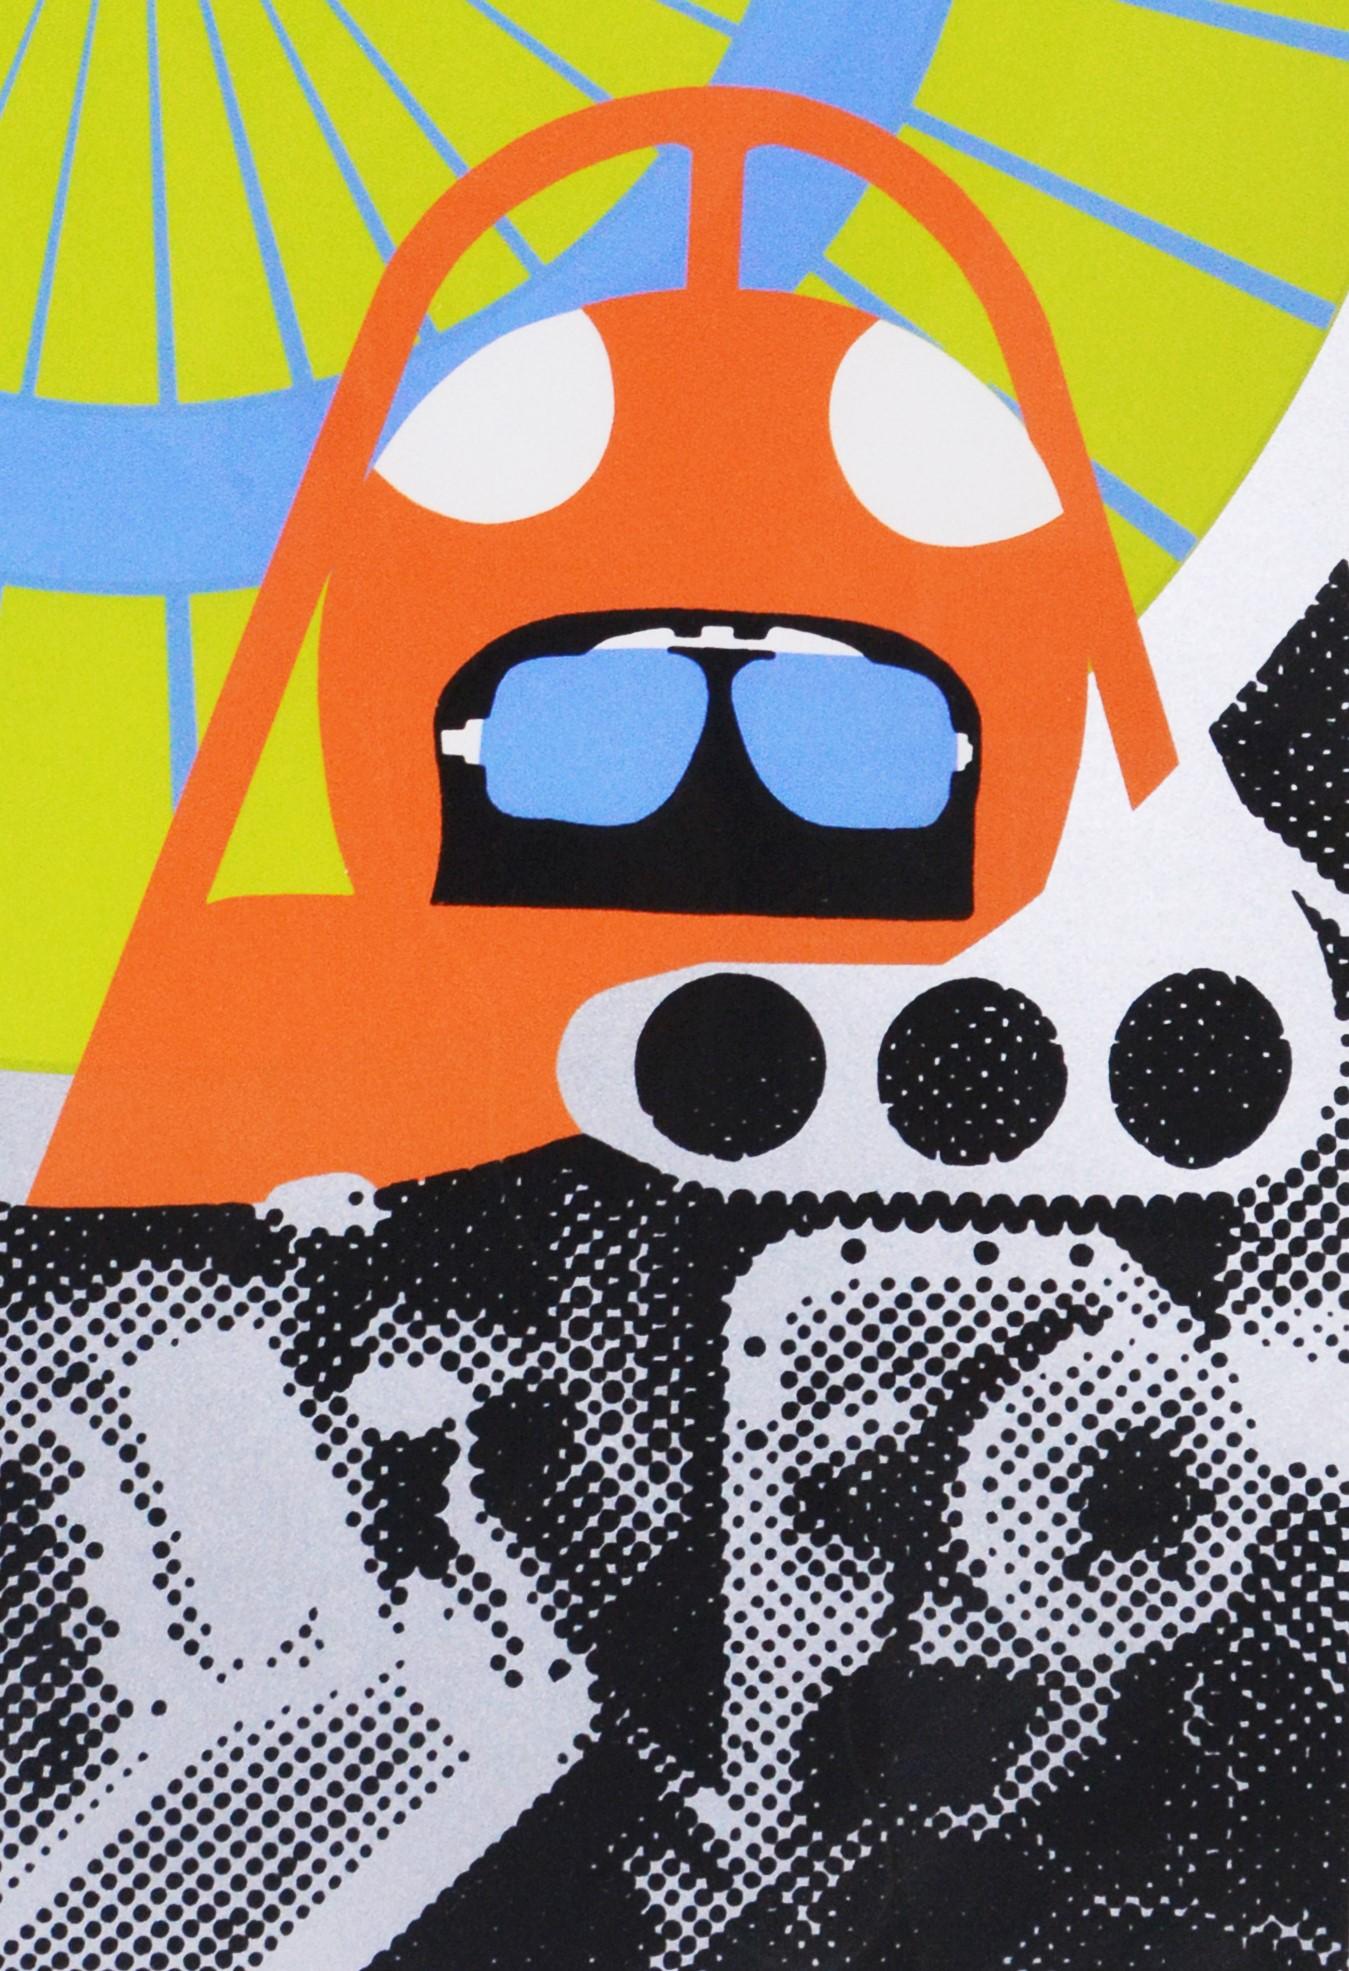 Screenprint in colours, 1968, on smooth wove paper, signed by Gerald Laing in pencil lower right and numbered from the limited edition of 150 lower left, printed and published by Gerald Laing with his blindstamp, sheet 89 cm x 58.6 cm.